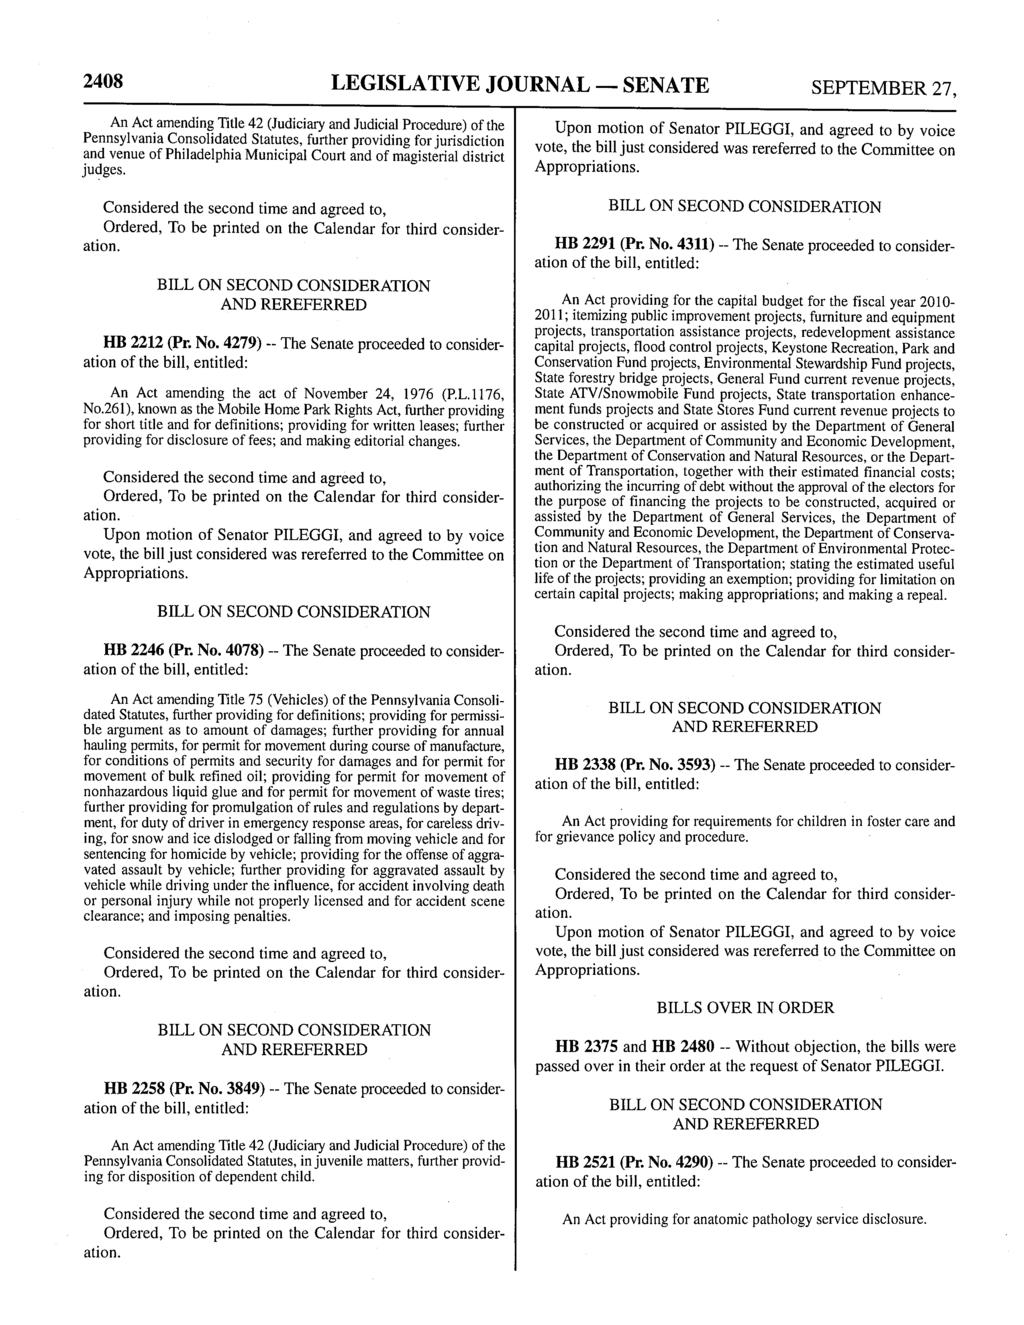 2408 LEGISLATIVE JOURNAL - SENATE SEPTEMBER 27, An Act amending Title 42 (Judiciary and Judicial Procedure) of the Pennsylvania Consolidated Statutes, further providing for jurisdiction and venue of